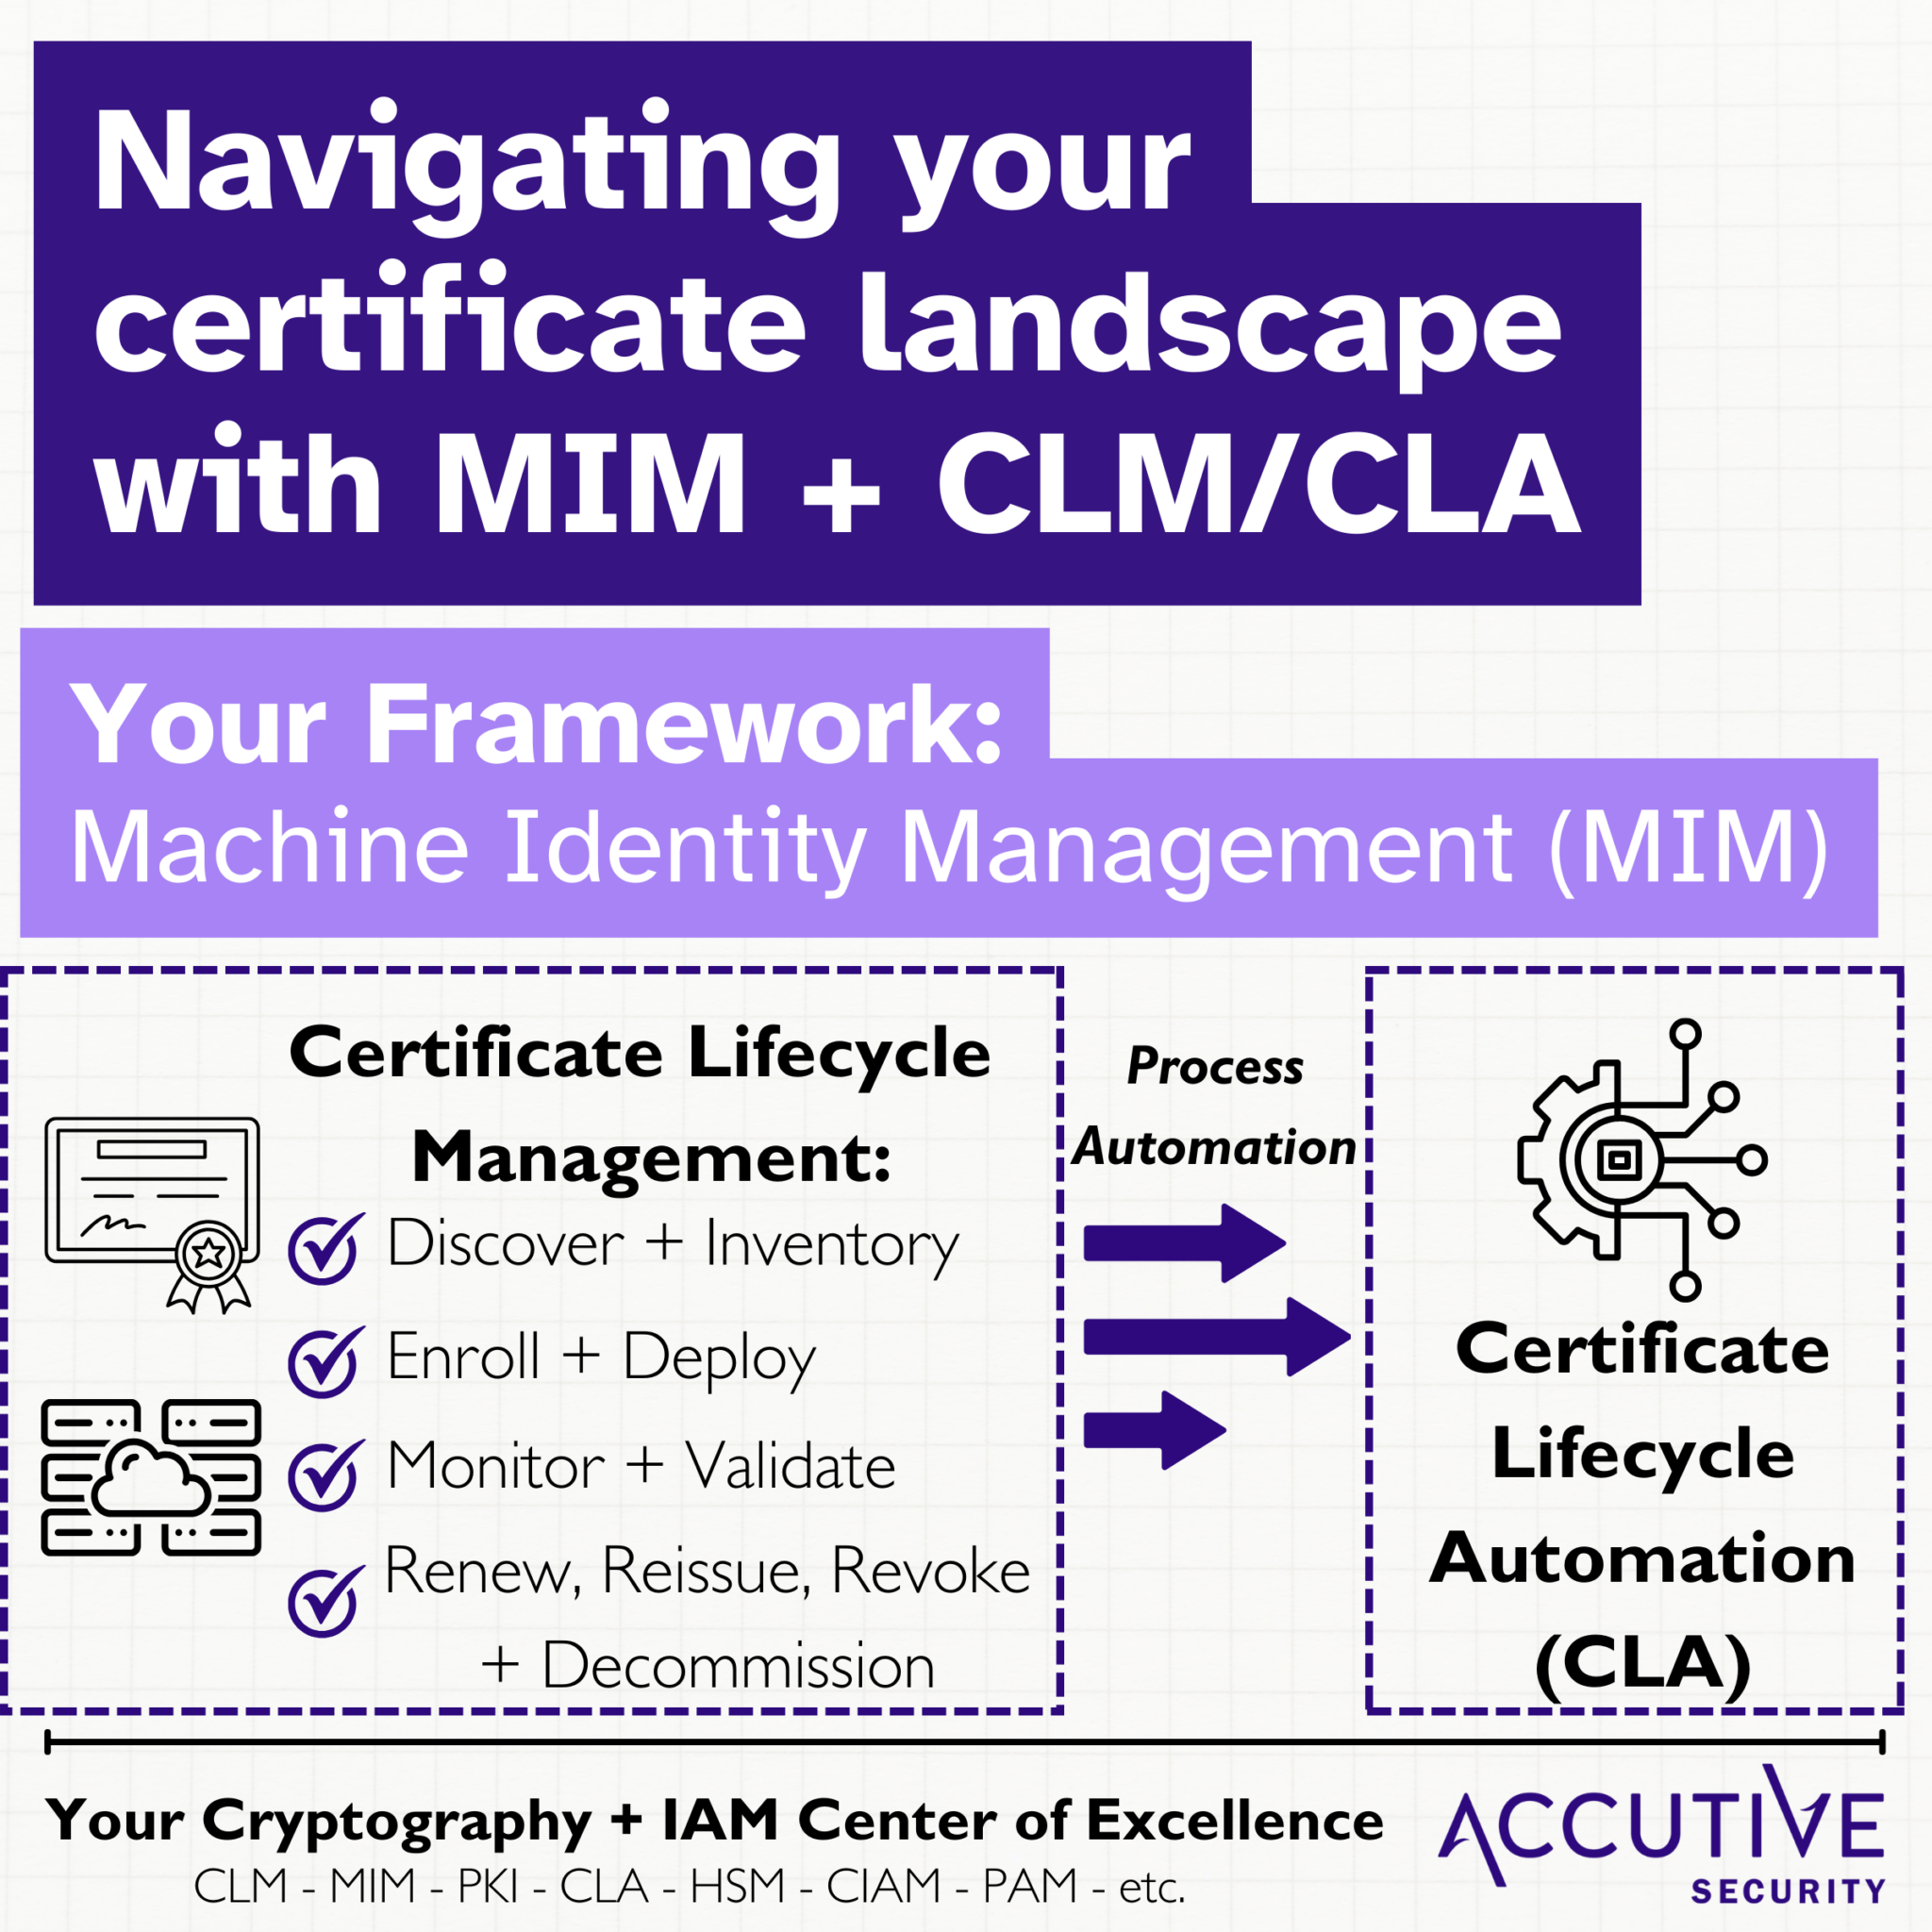 certificate lifecycle management + machine identity management